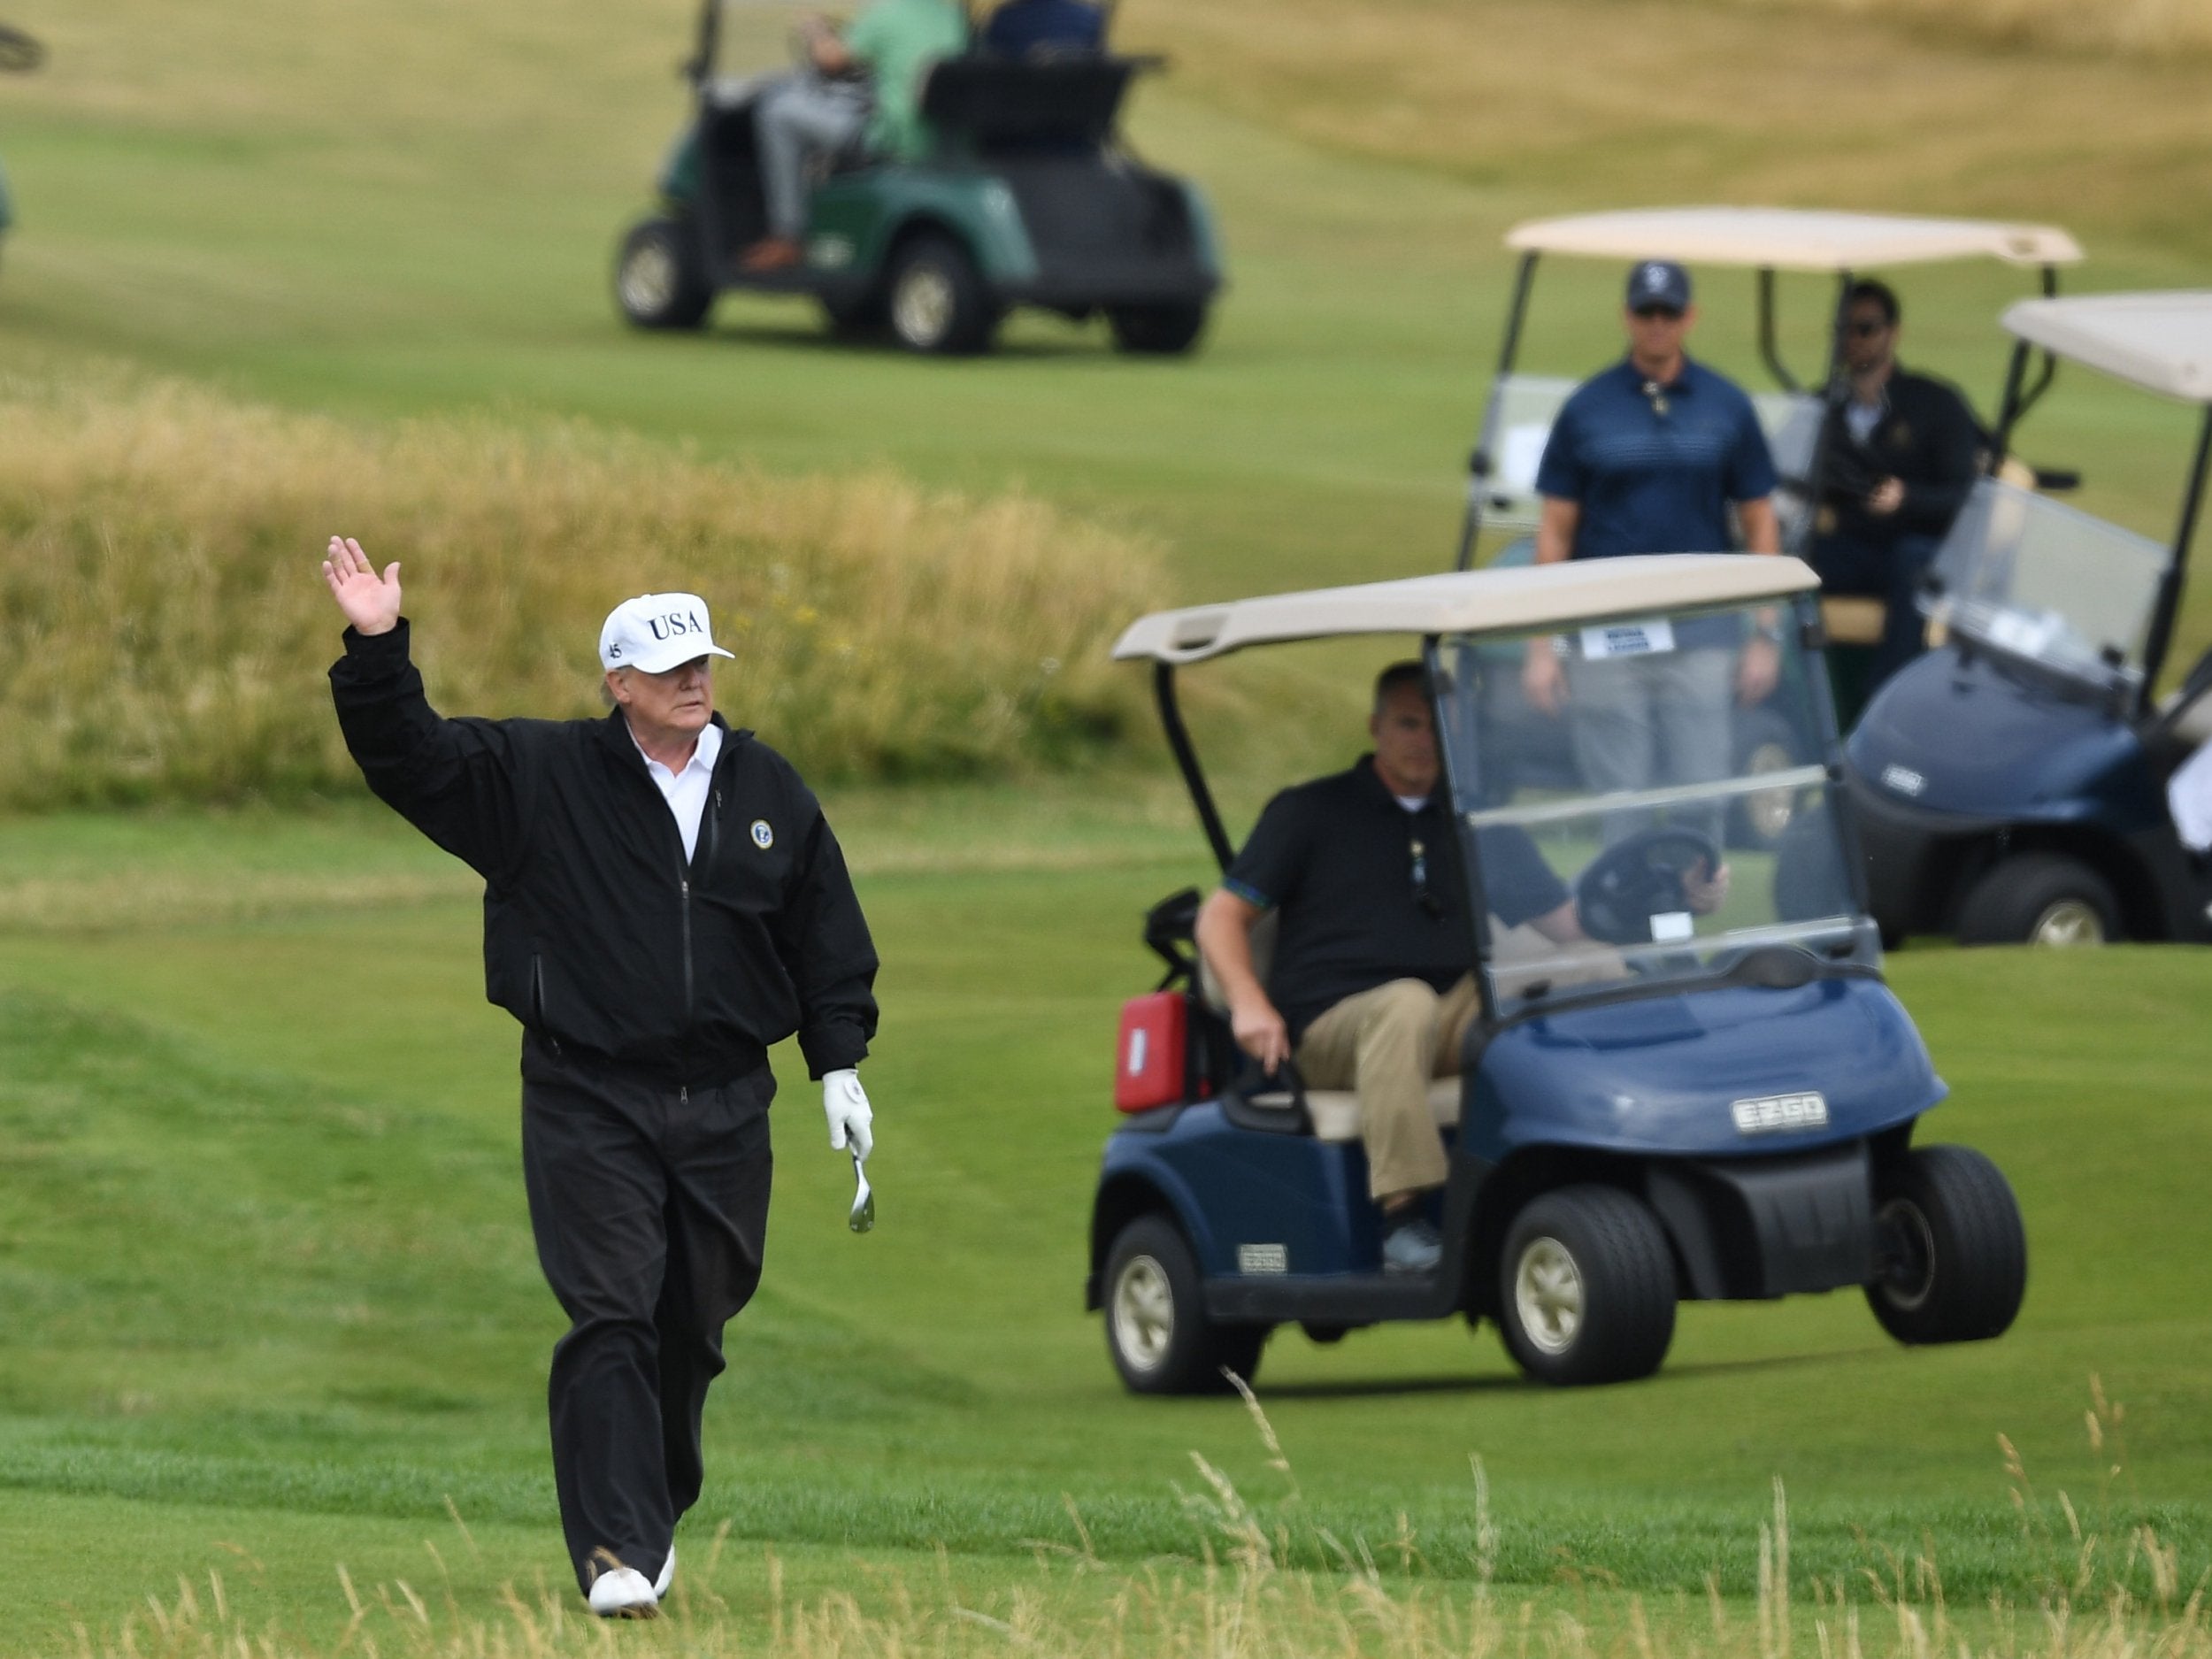 Donald Trump pictured enjoying a round of golf during his visit to the UK